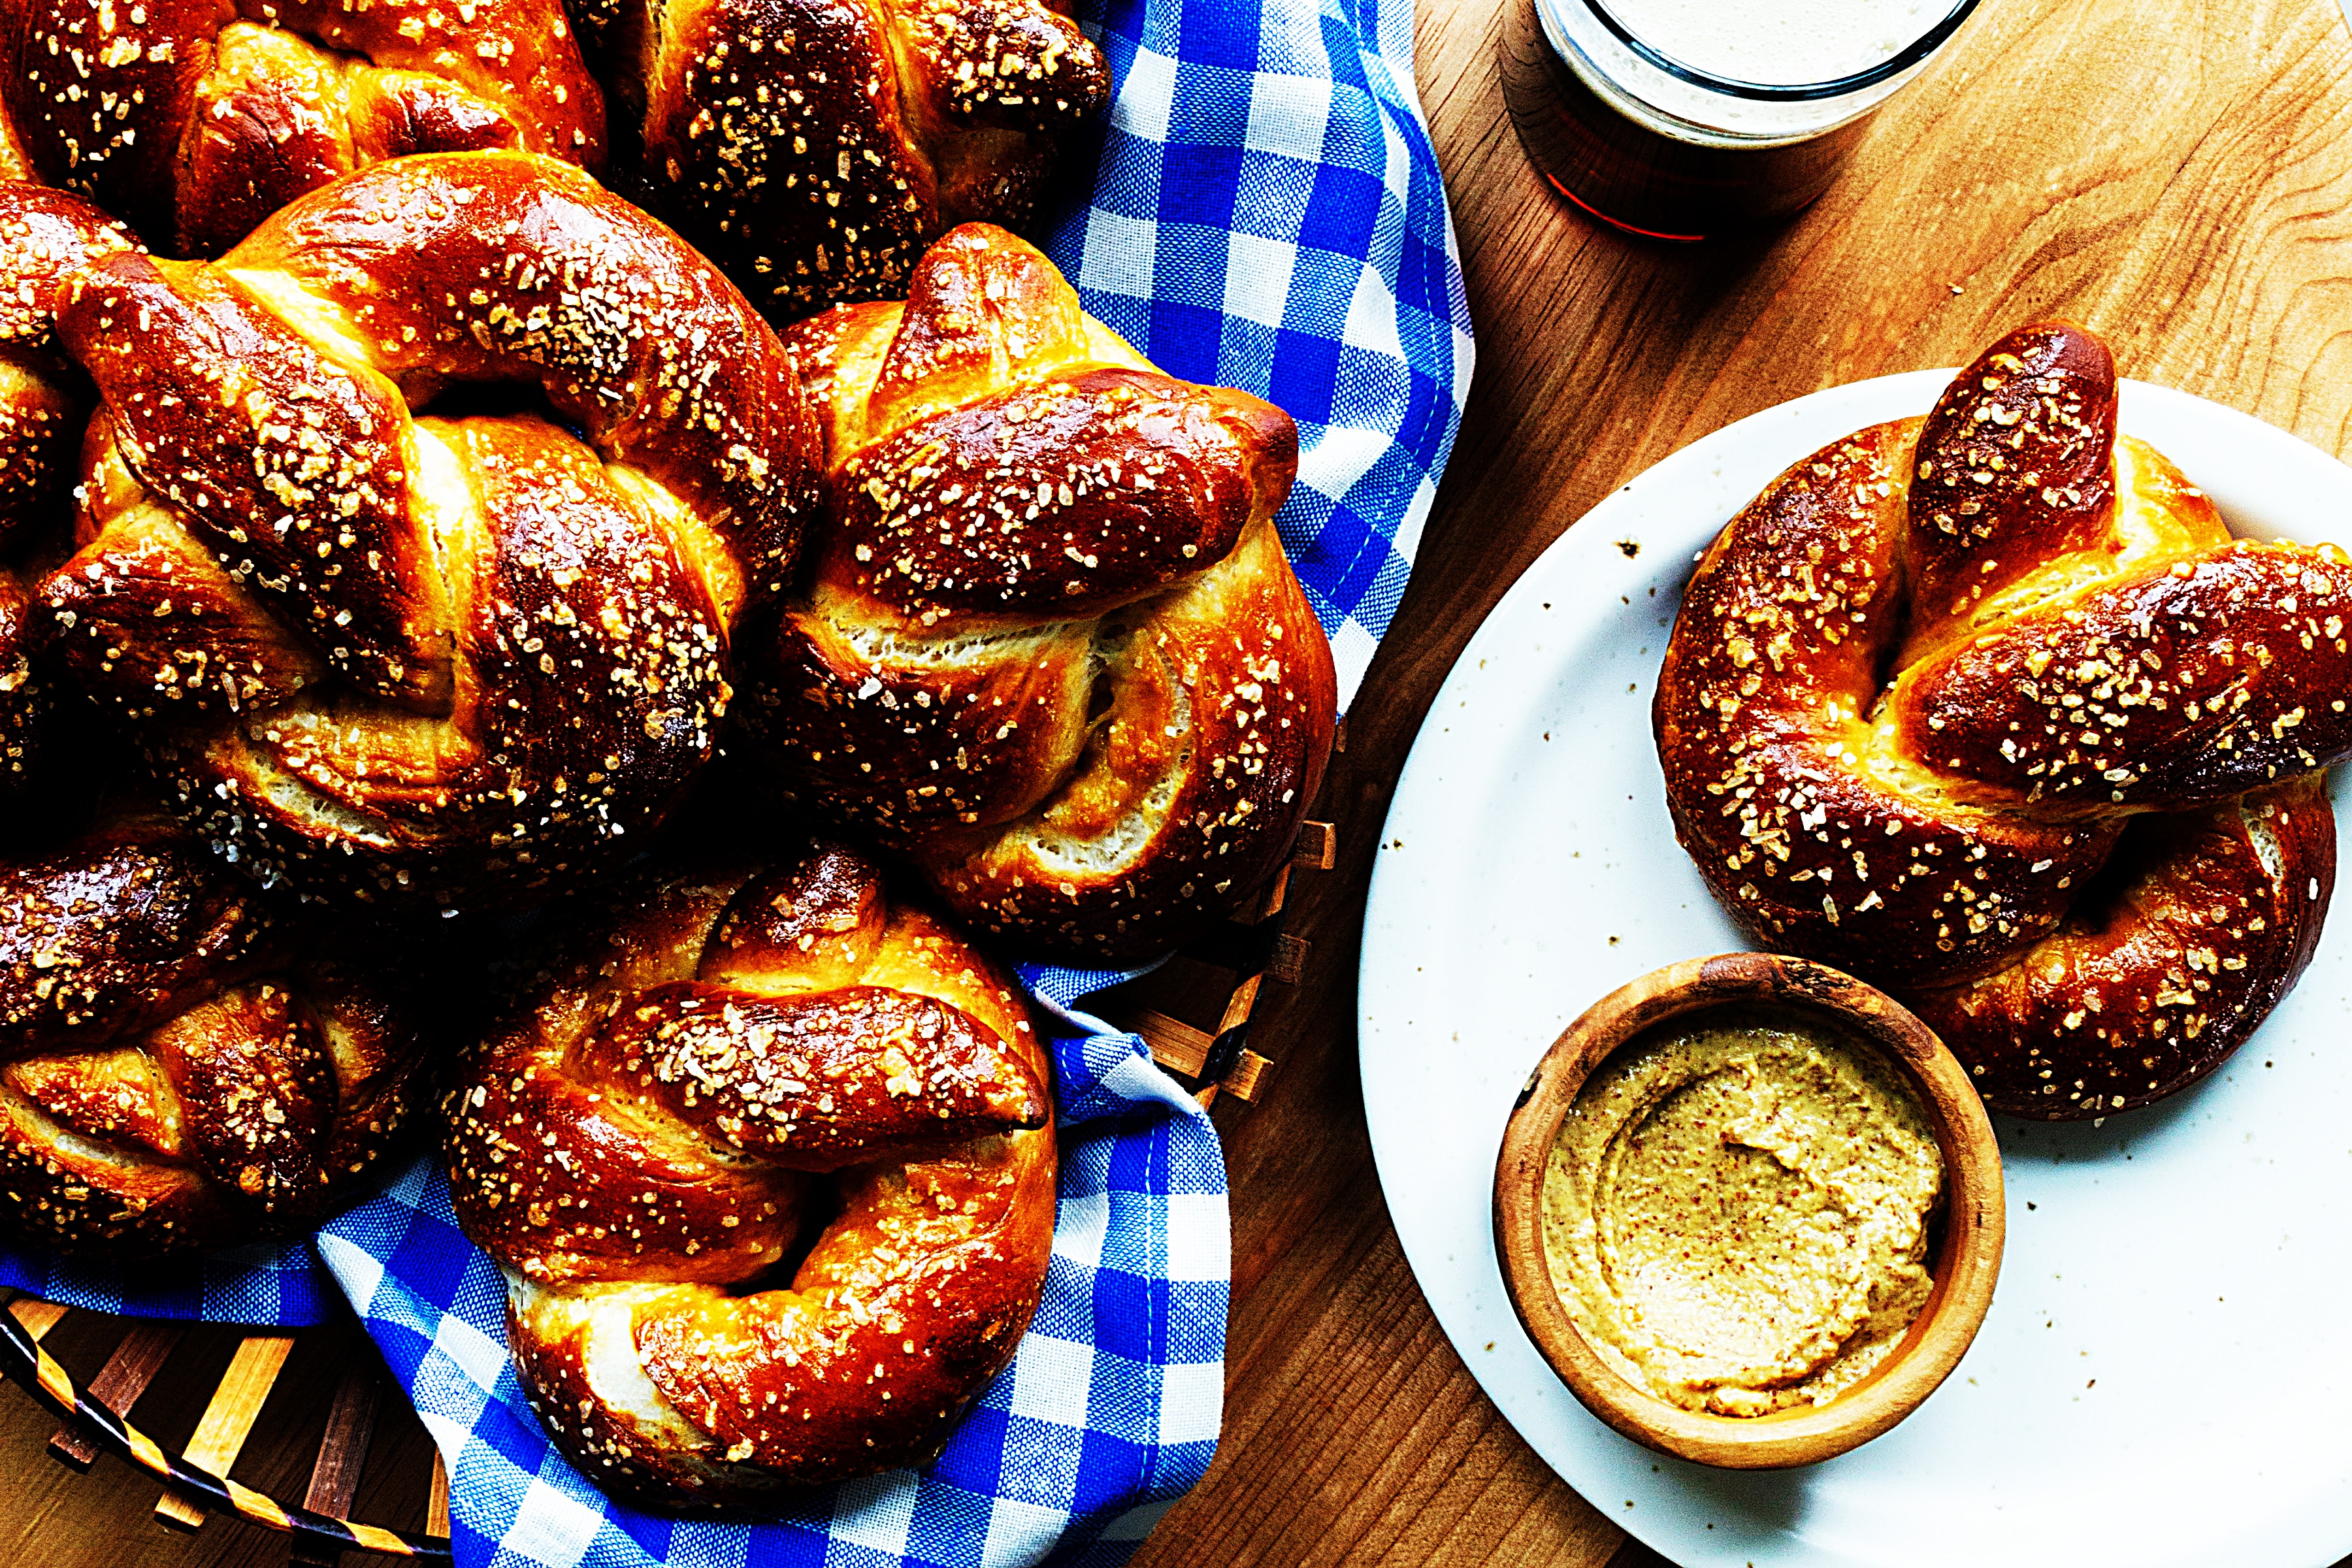 Stupid-Easy Recipe for German-Style Soft Pretzels (#1 Top-Rated)